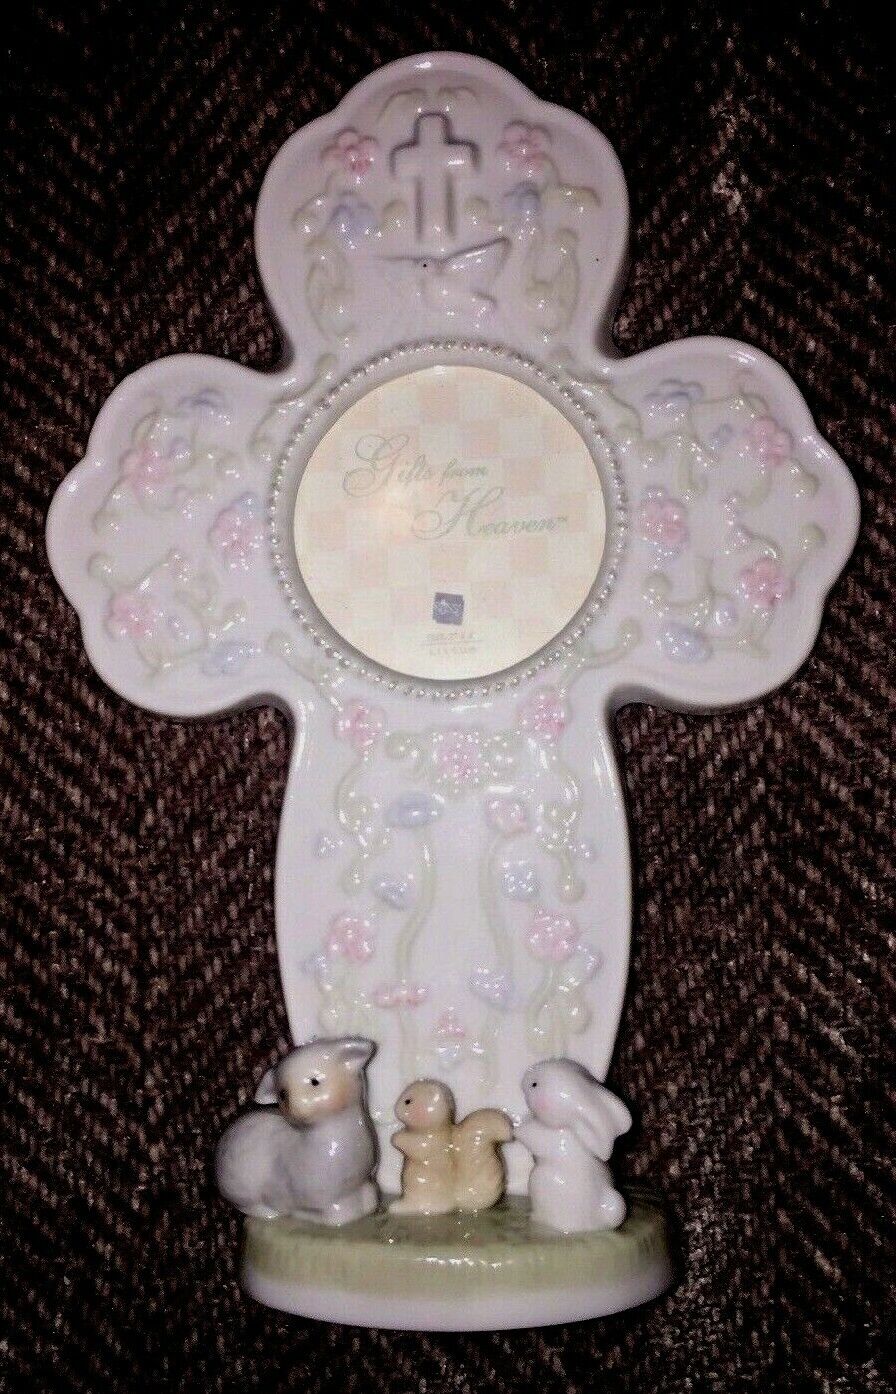 RUSS Gifts From Heaven Porcelain Cross Picture Frame New